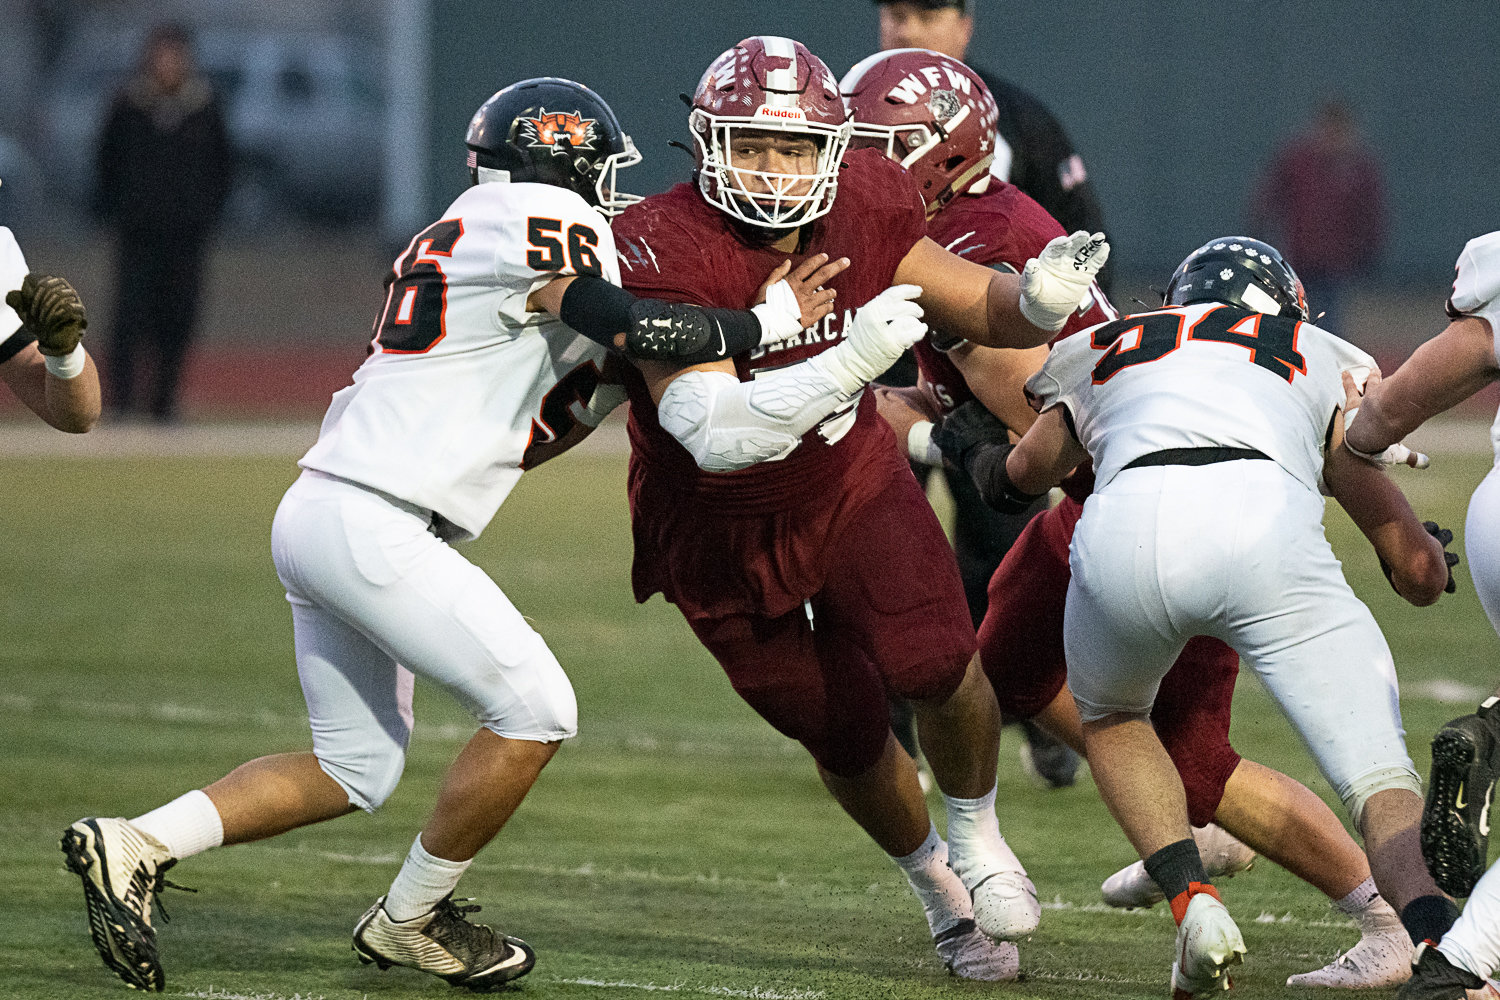 W.F. West lineman Daniel Matagi breaks through the Ephrata line Nov. 11 at Centralia Tiger Stadium in the first round of the state playoffs.